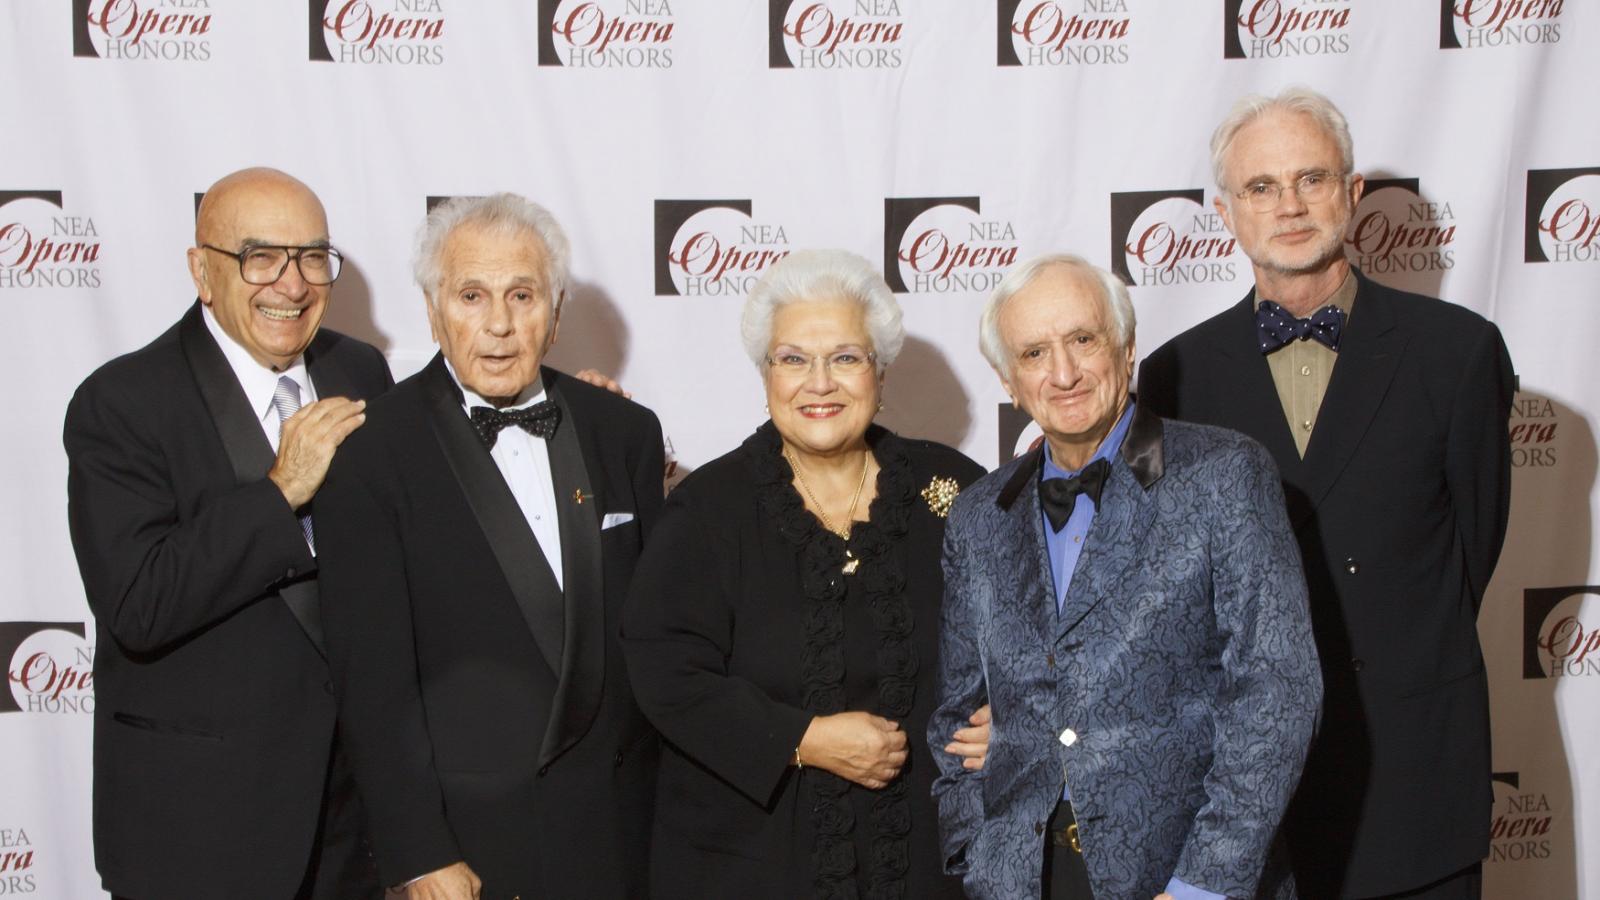 Julius Rudel with other opera honorees